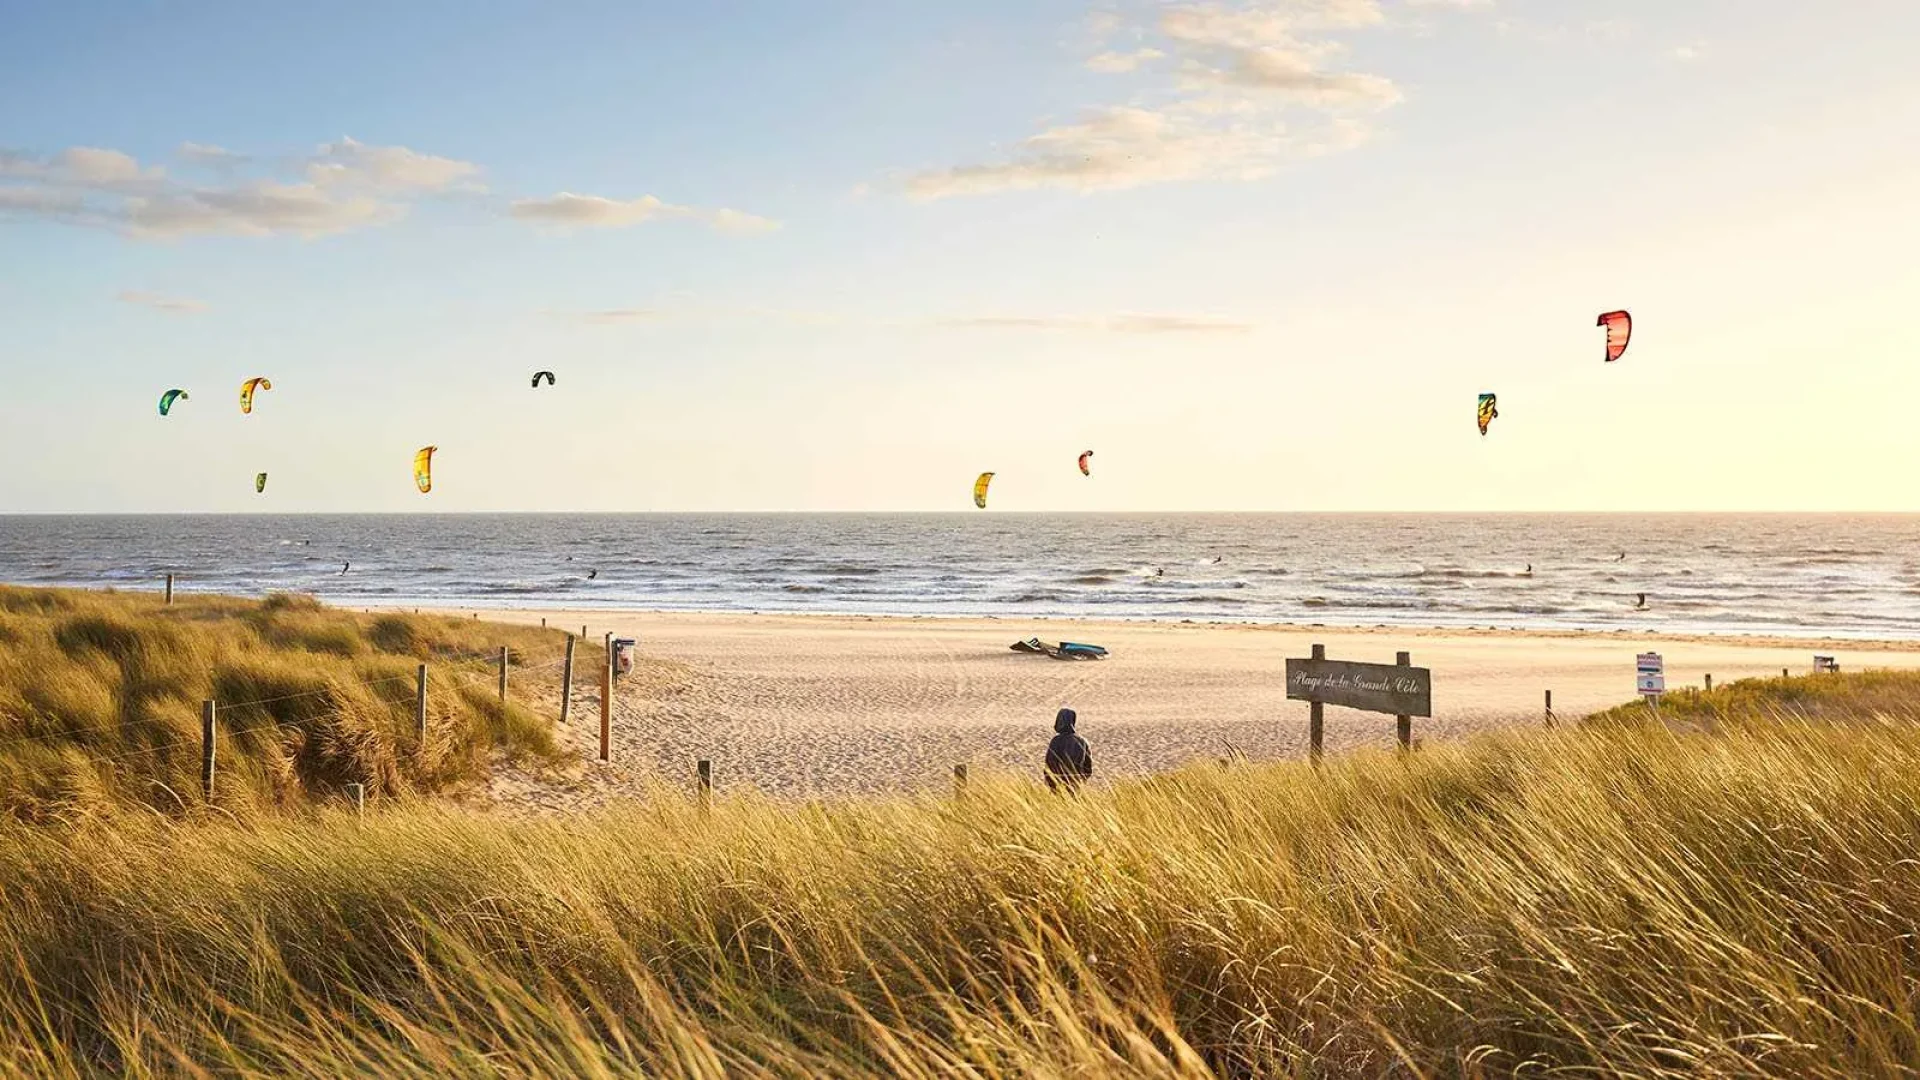 view of the dunes from people kite surfing on the grande côte beach at la barre de monts - fromentine